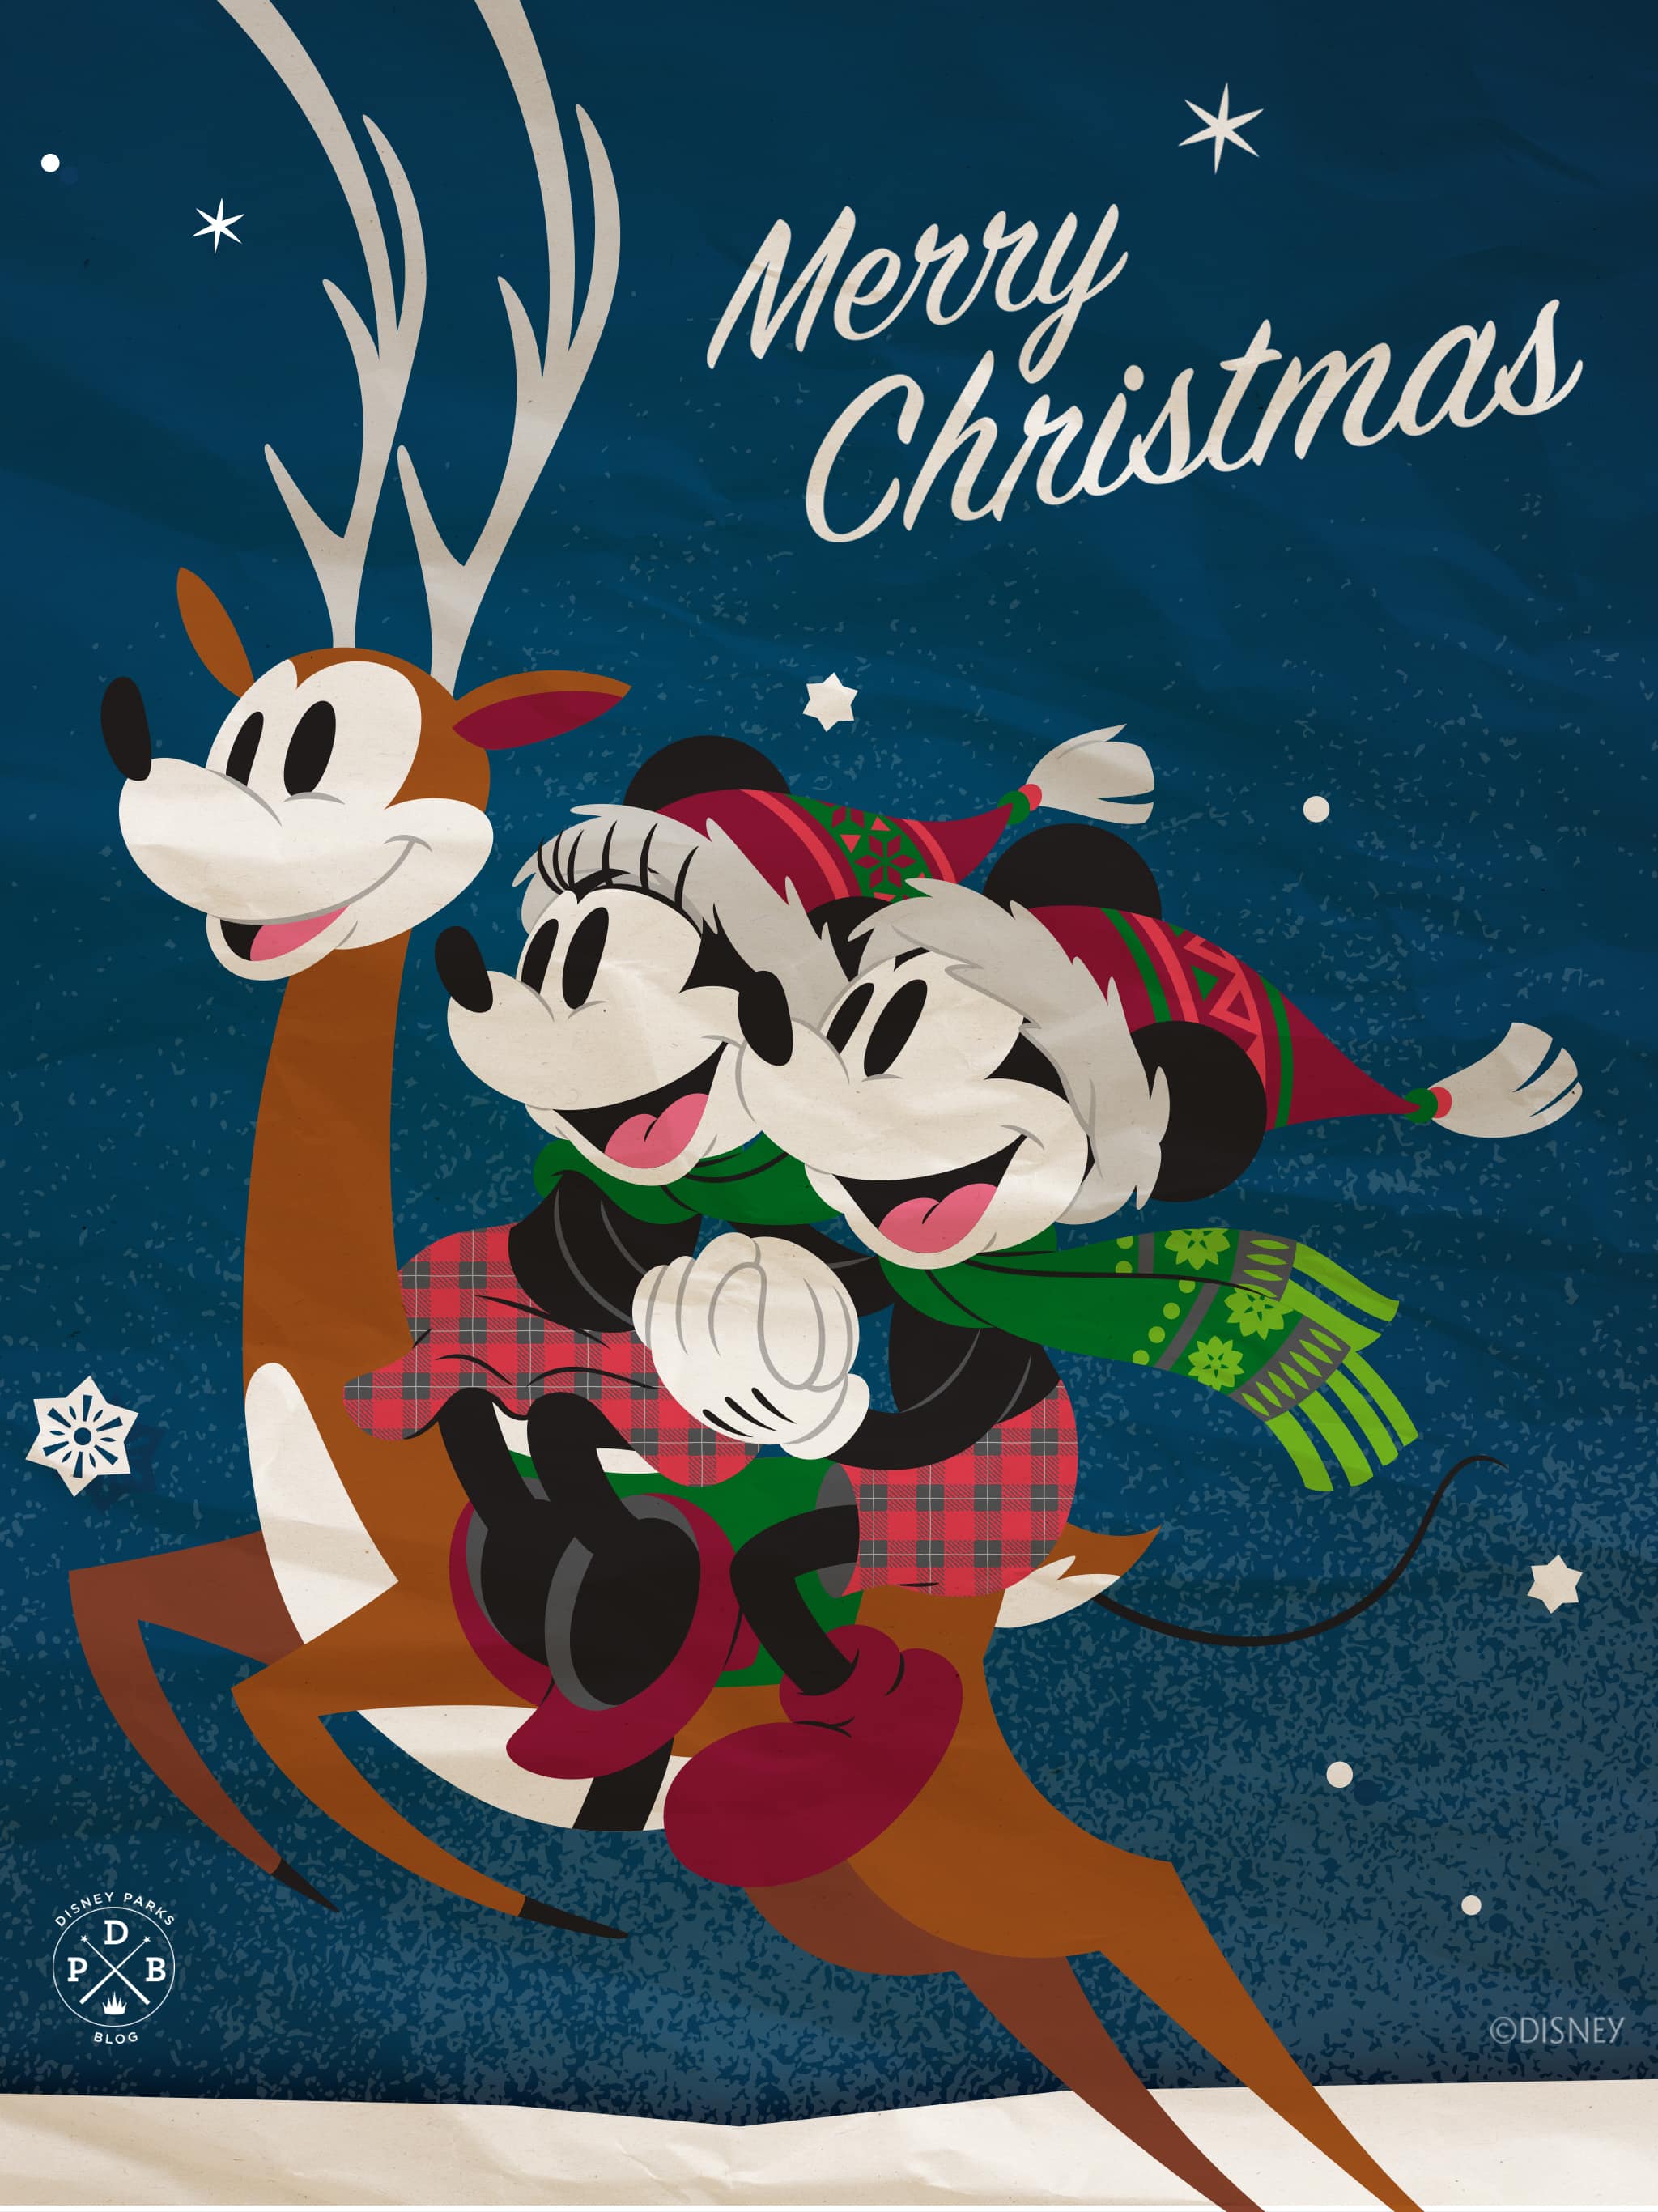 Mickey and Minnie Mouse ride a reindeer in a Disney Christmas card. - Mickey Mouse, Minnie Mouse